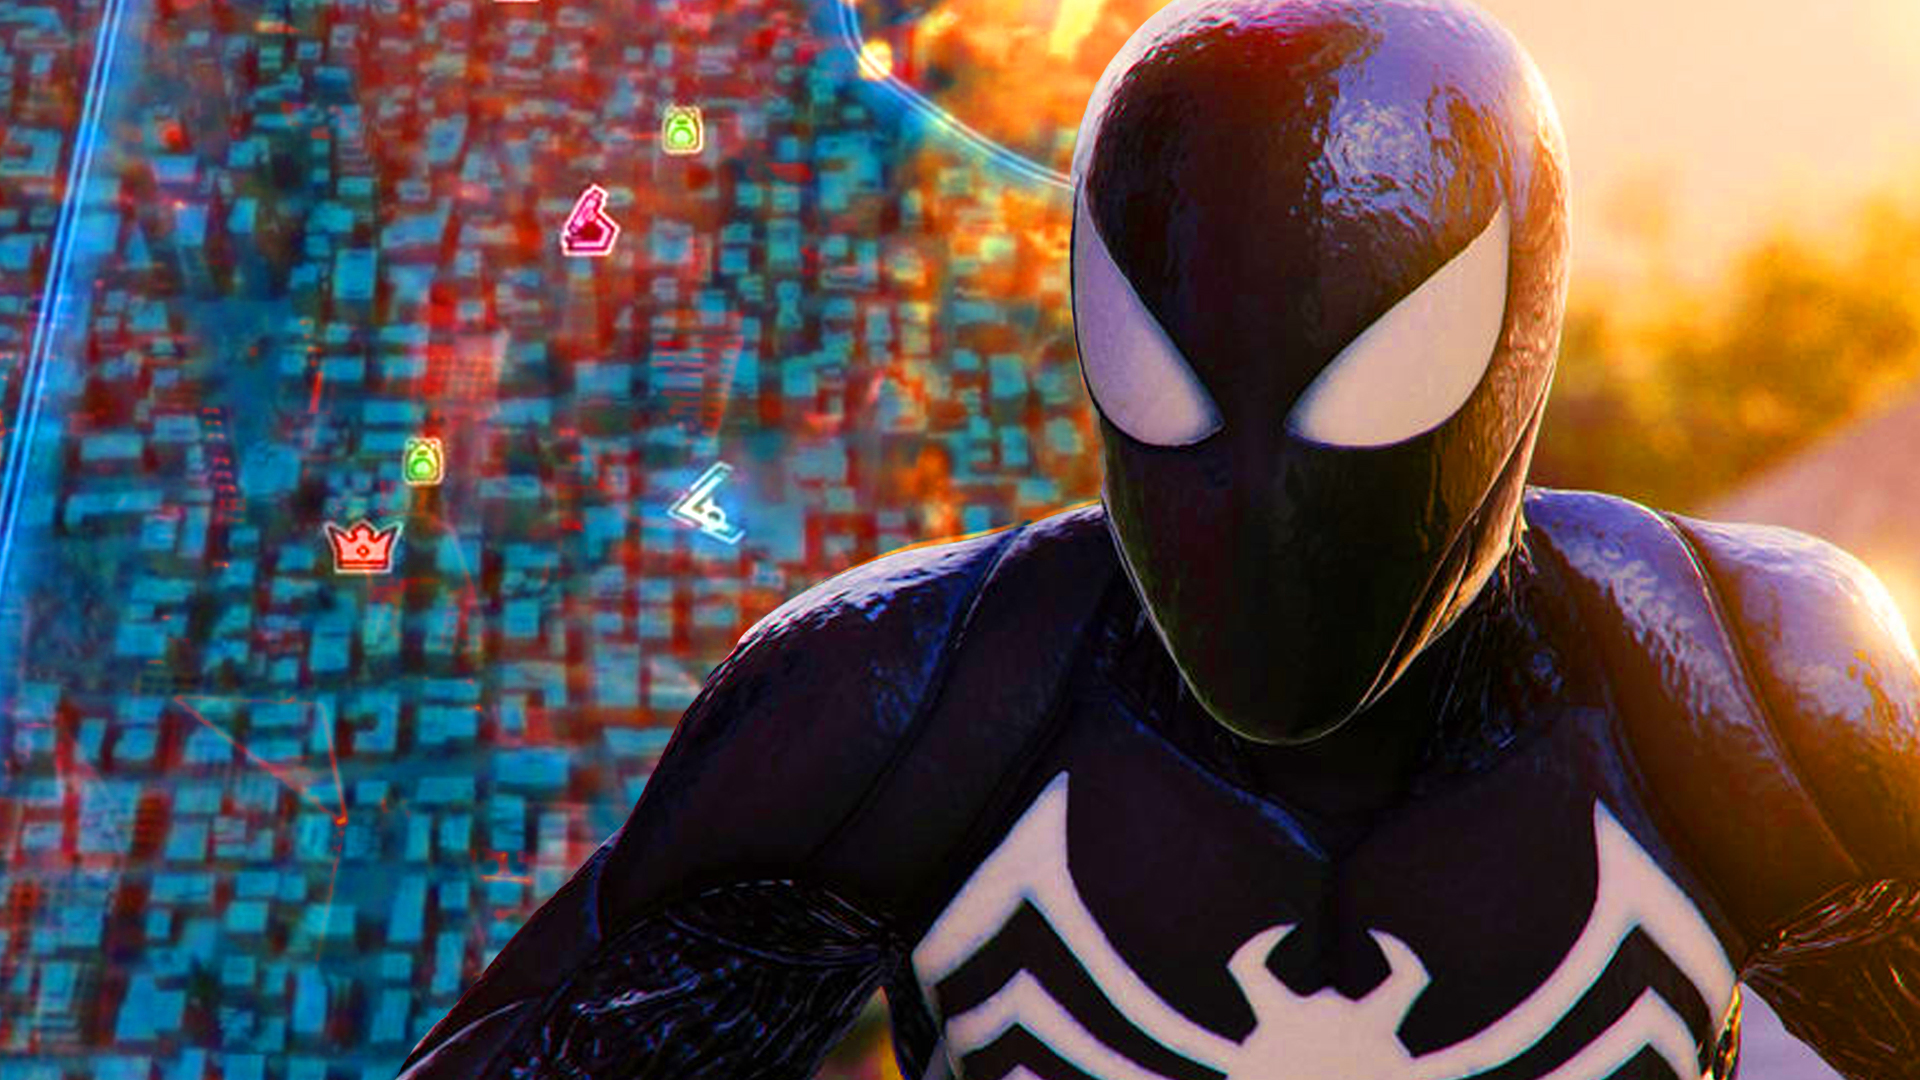 Marvel's Spider-Man 2 just revealed its full map, and it's huge